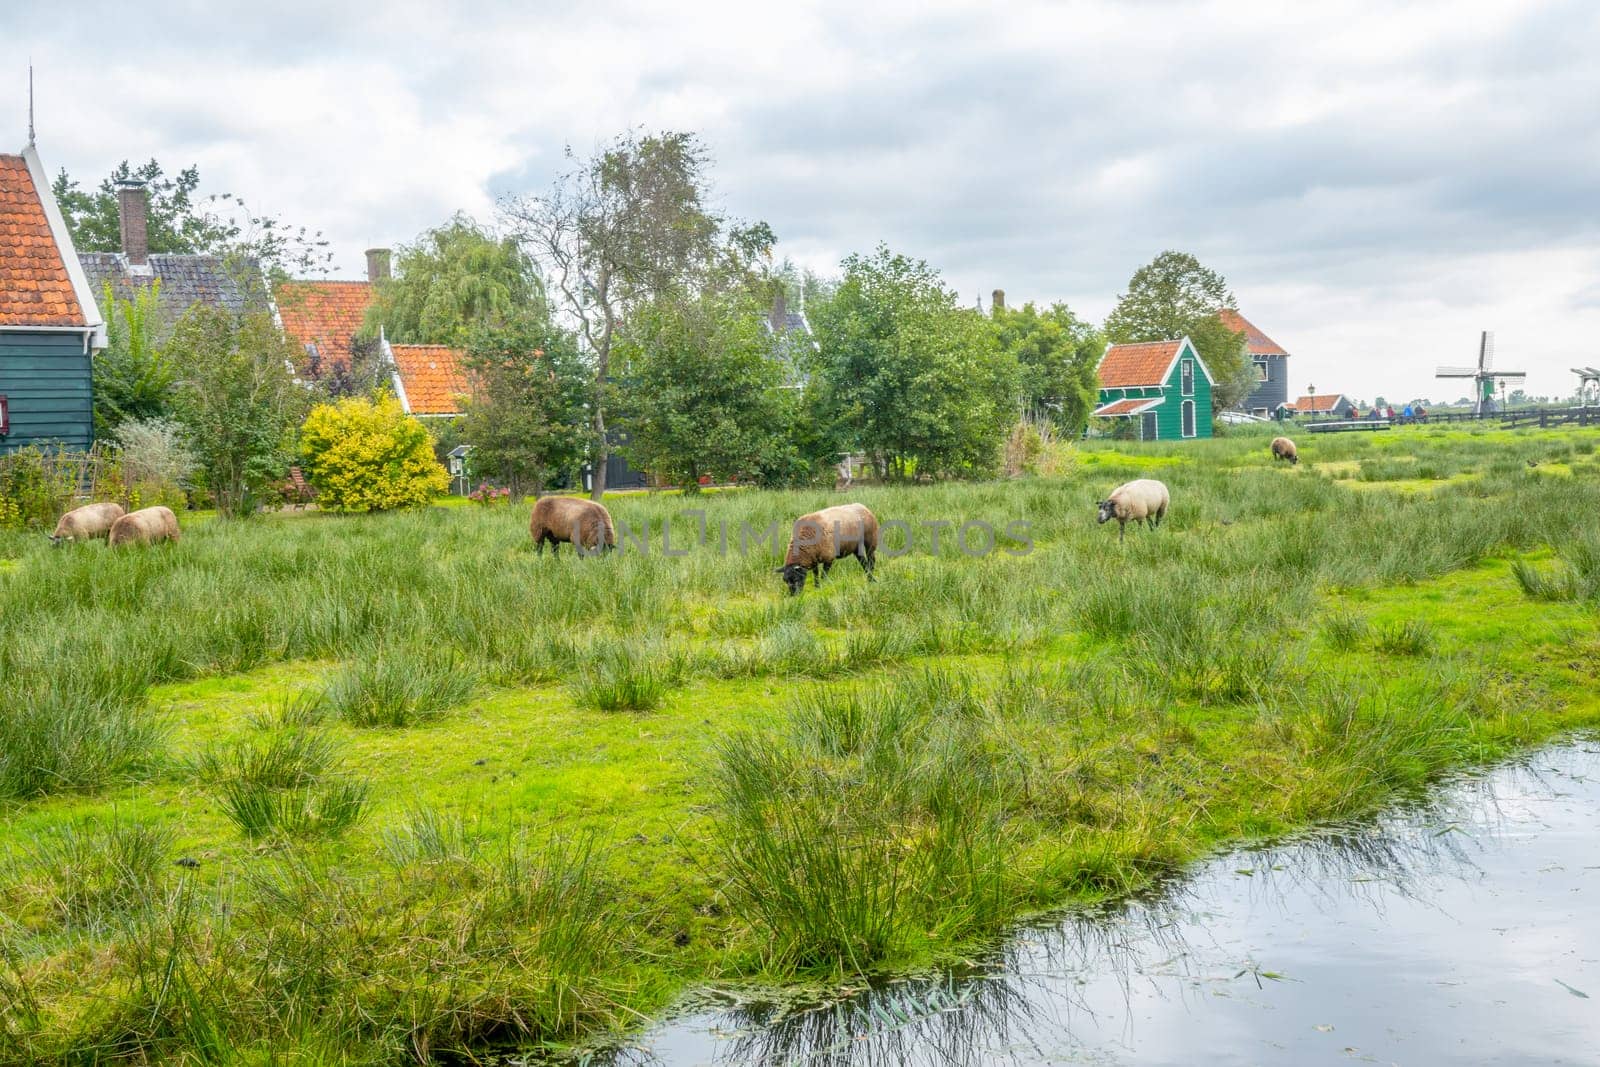 Netherlands. Cloudy summer day in the Zaanse Schans. Typical Dutch houses, grazing sheep and windmills in the distance